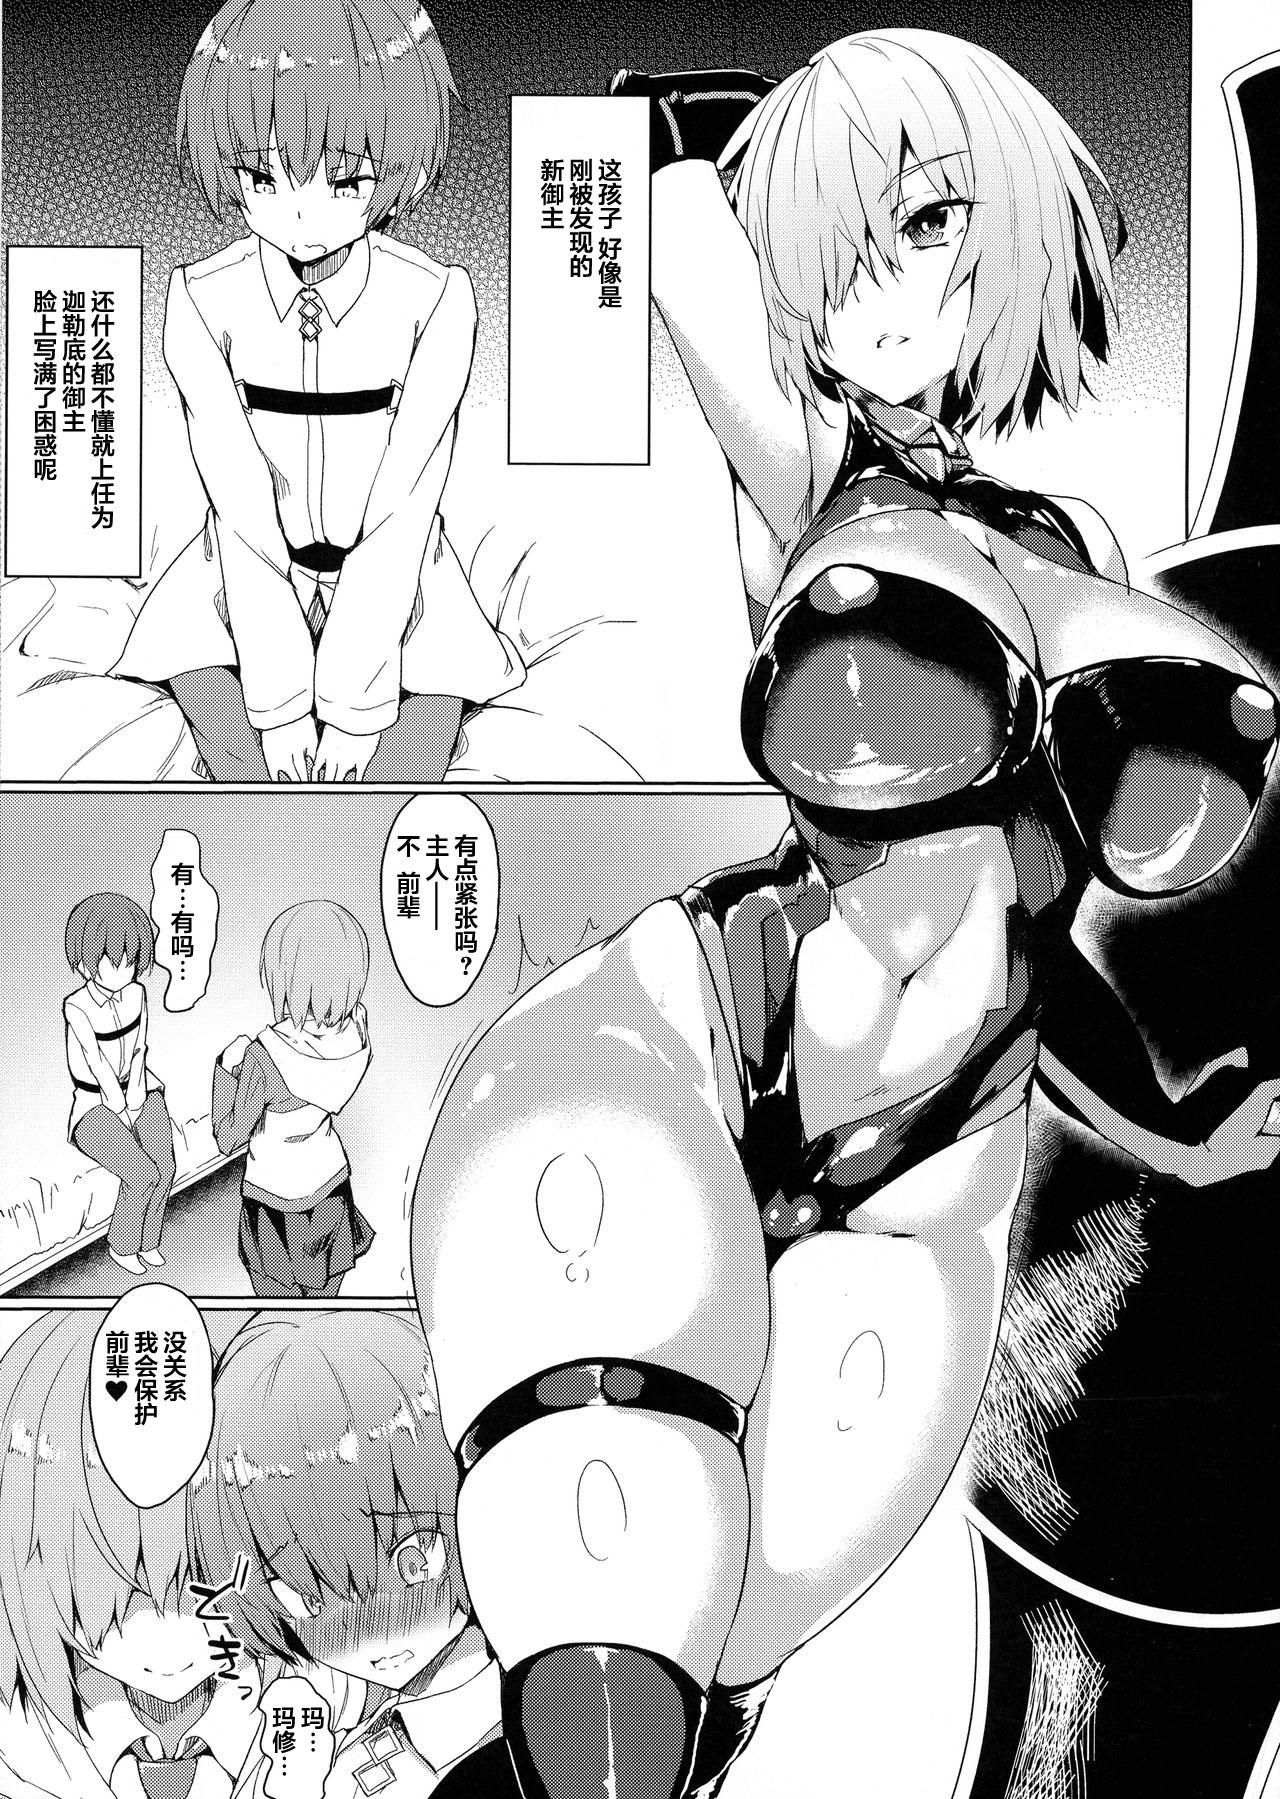 Homemade Mash Onee-chan to Shota Master - Fate grand order Panty - Page 6